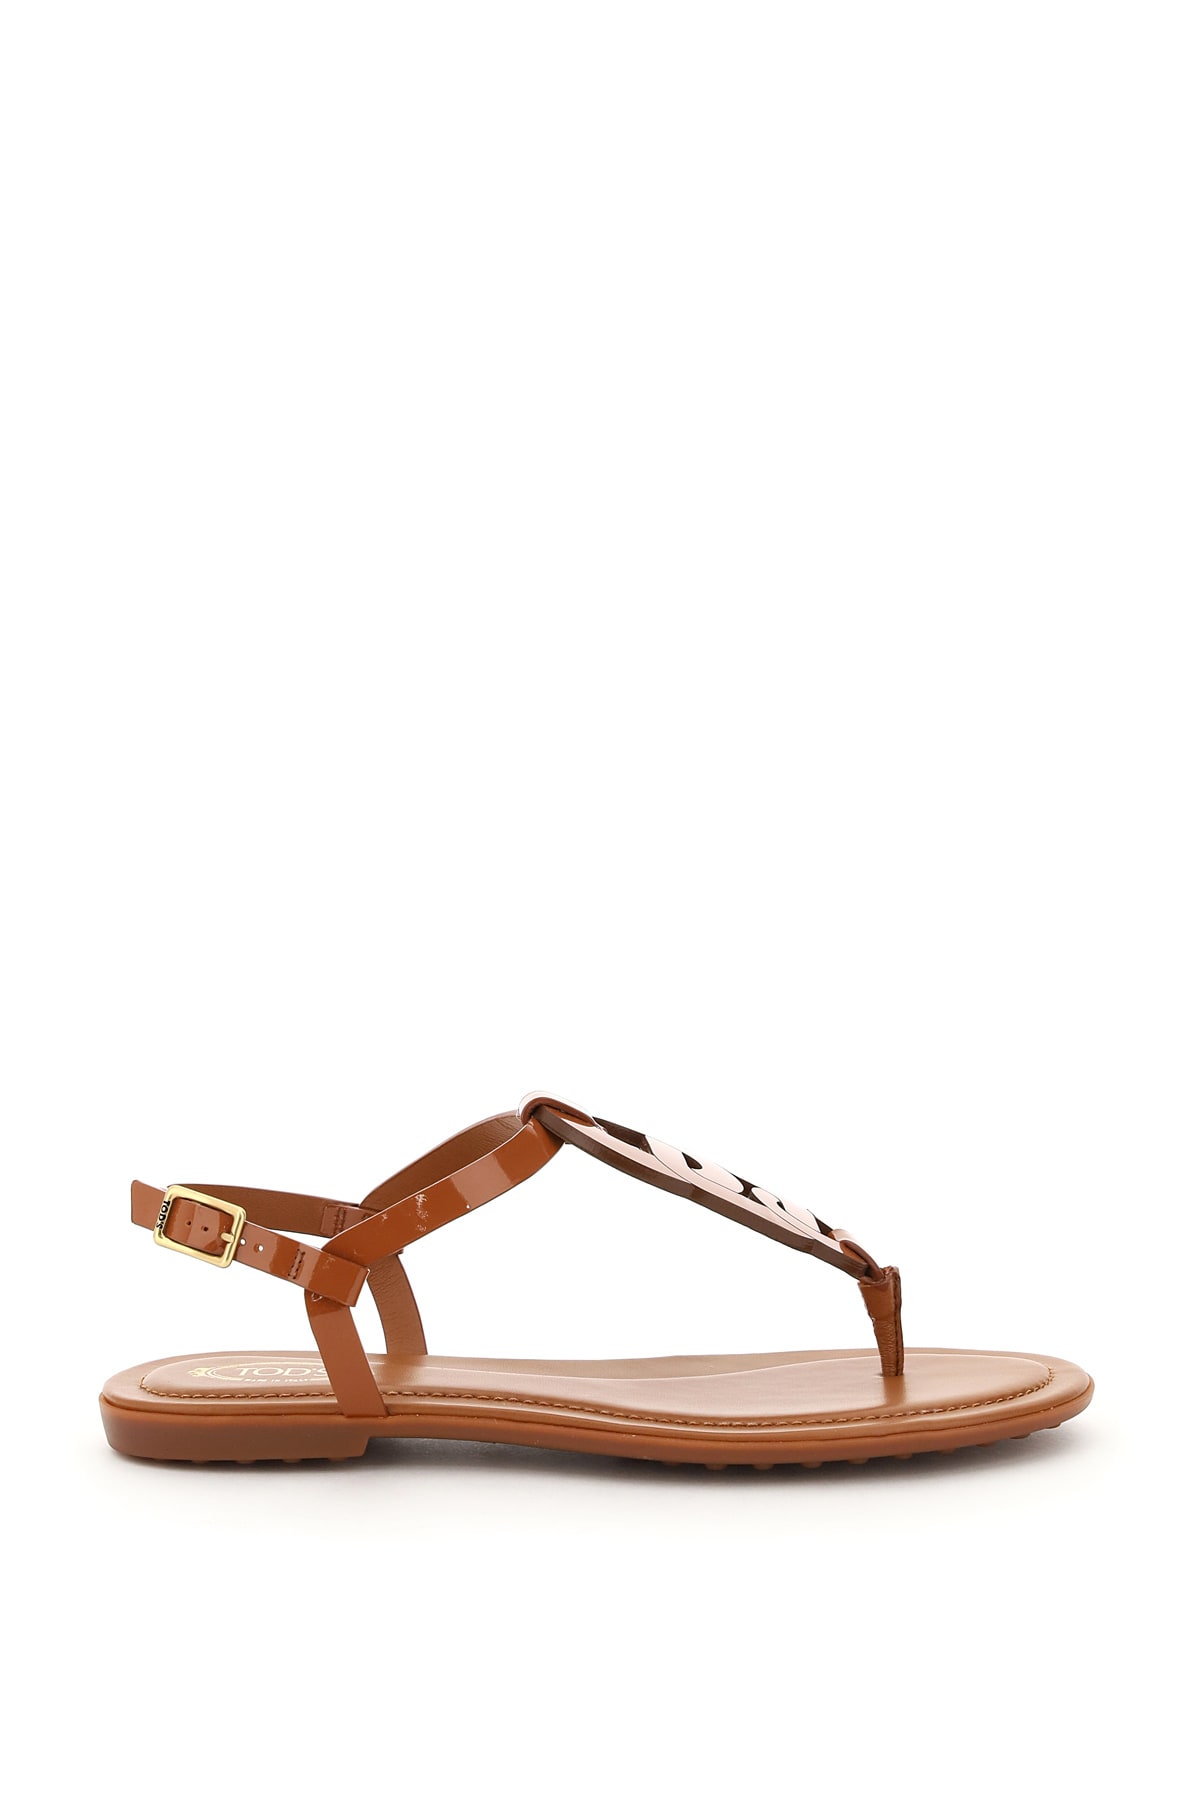 Tods Chain Thong Sandals